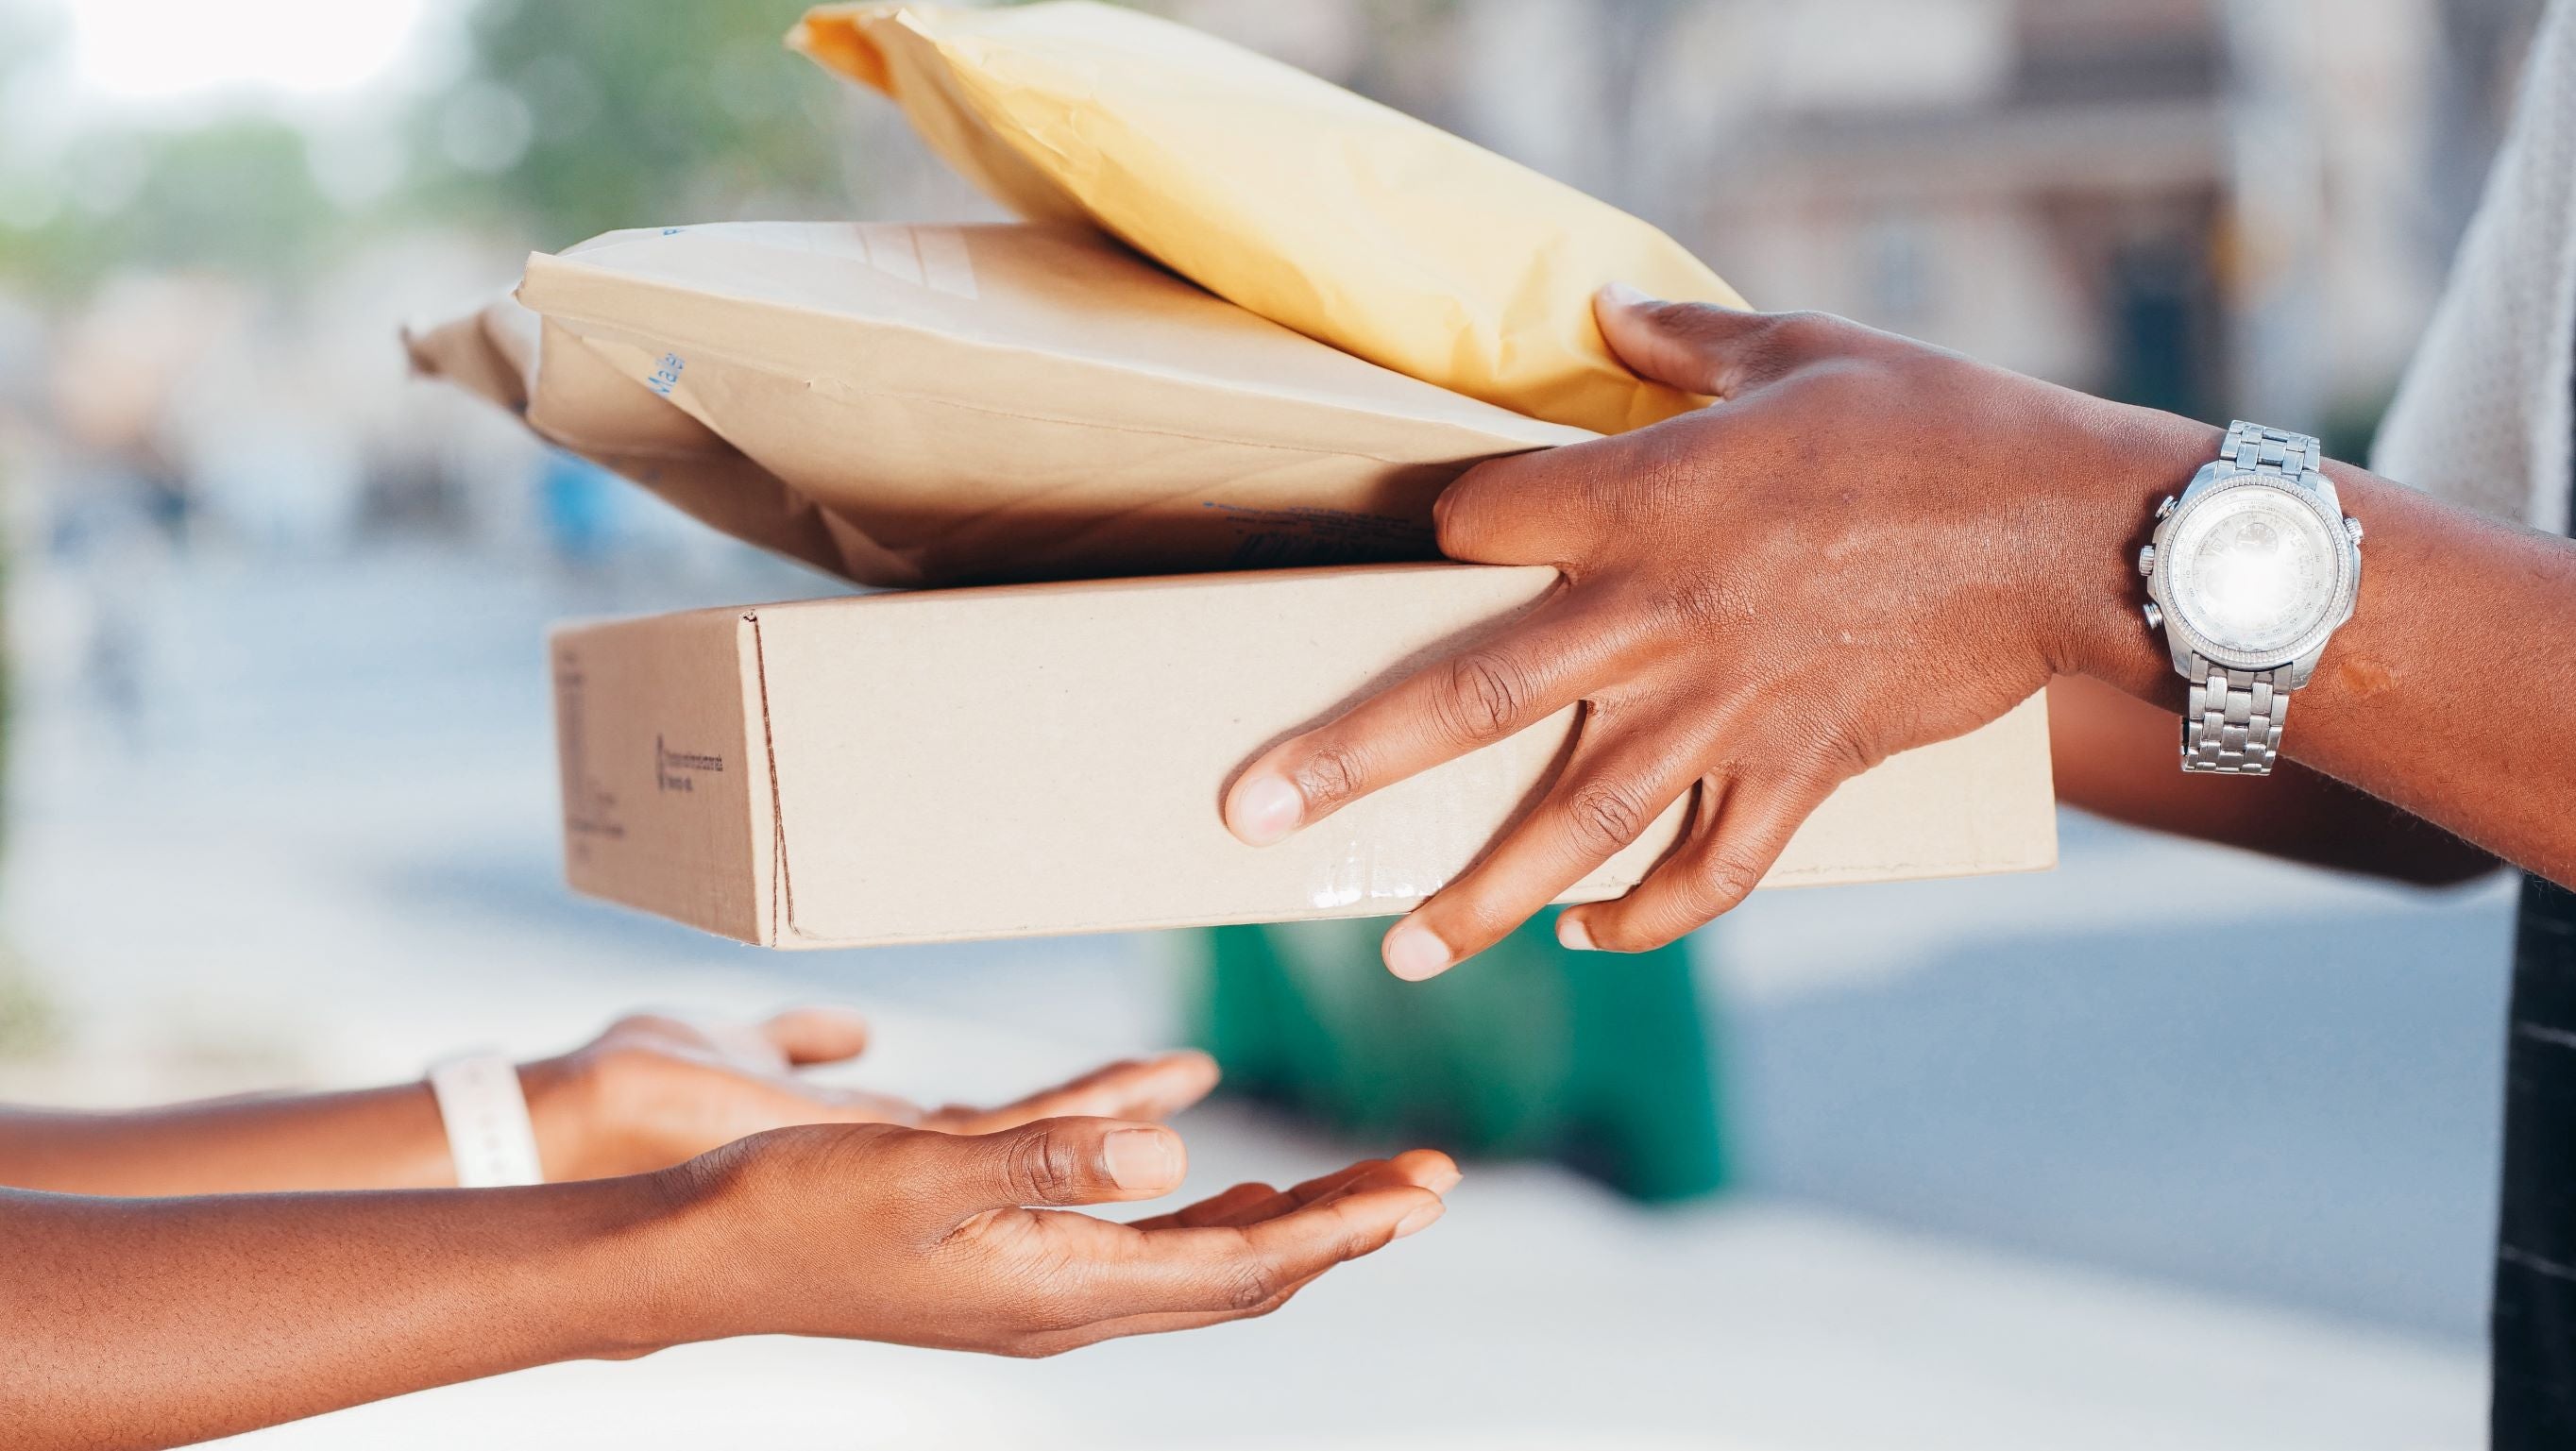 A Person Handing Over Delivery Packages